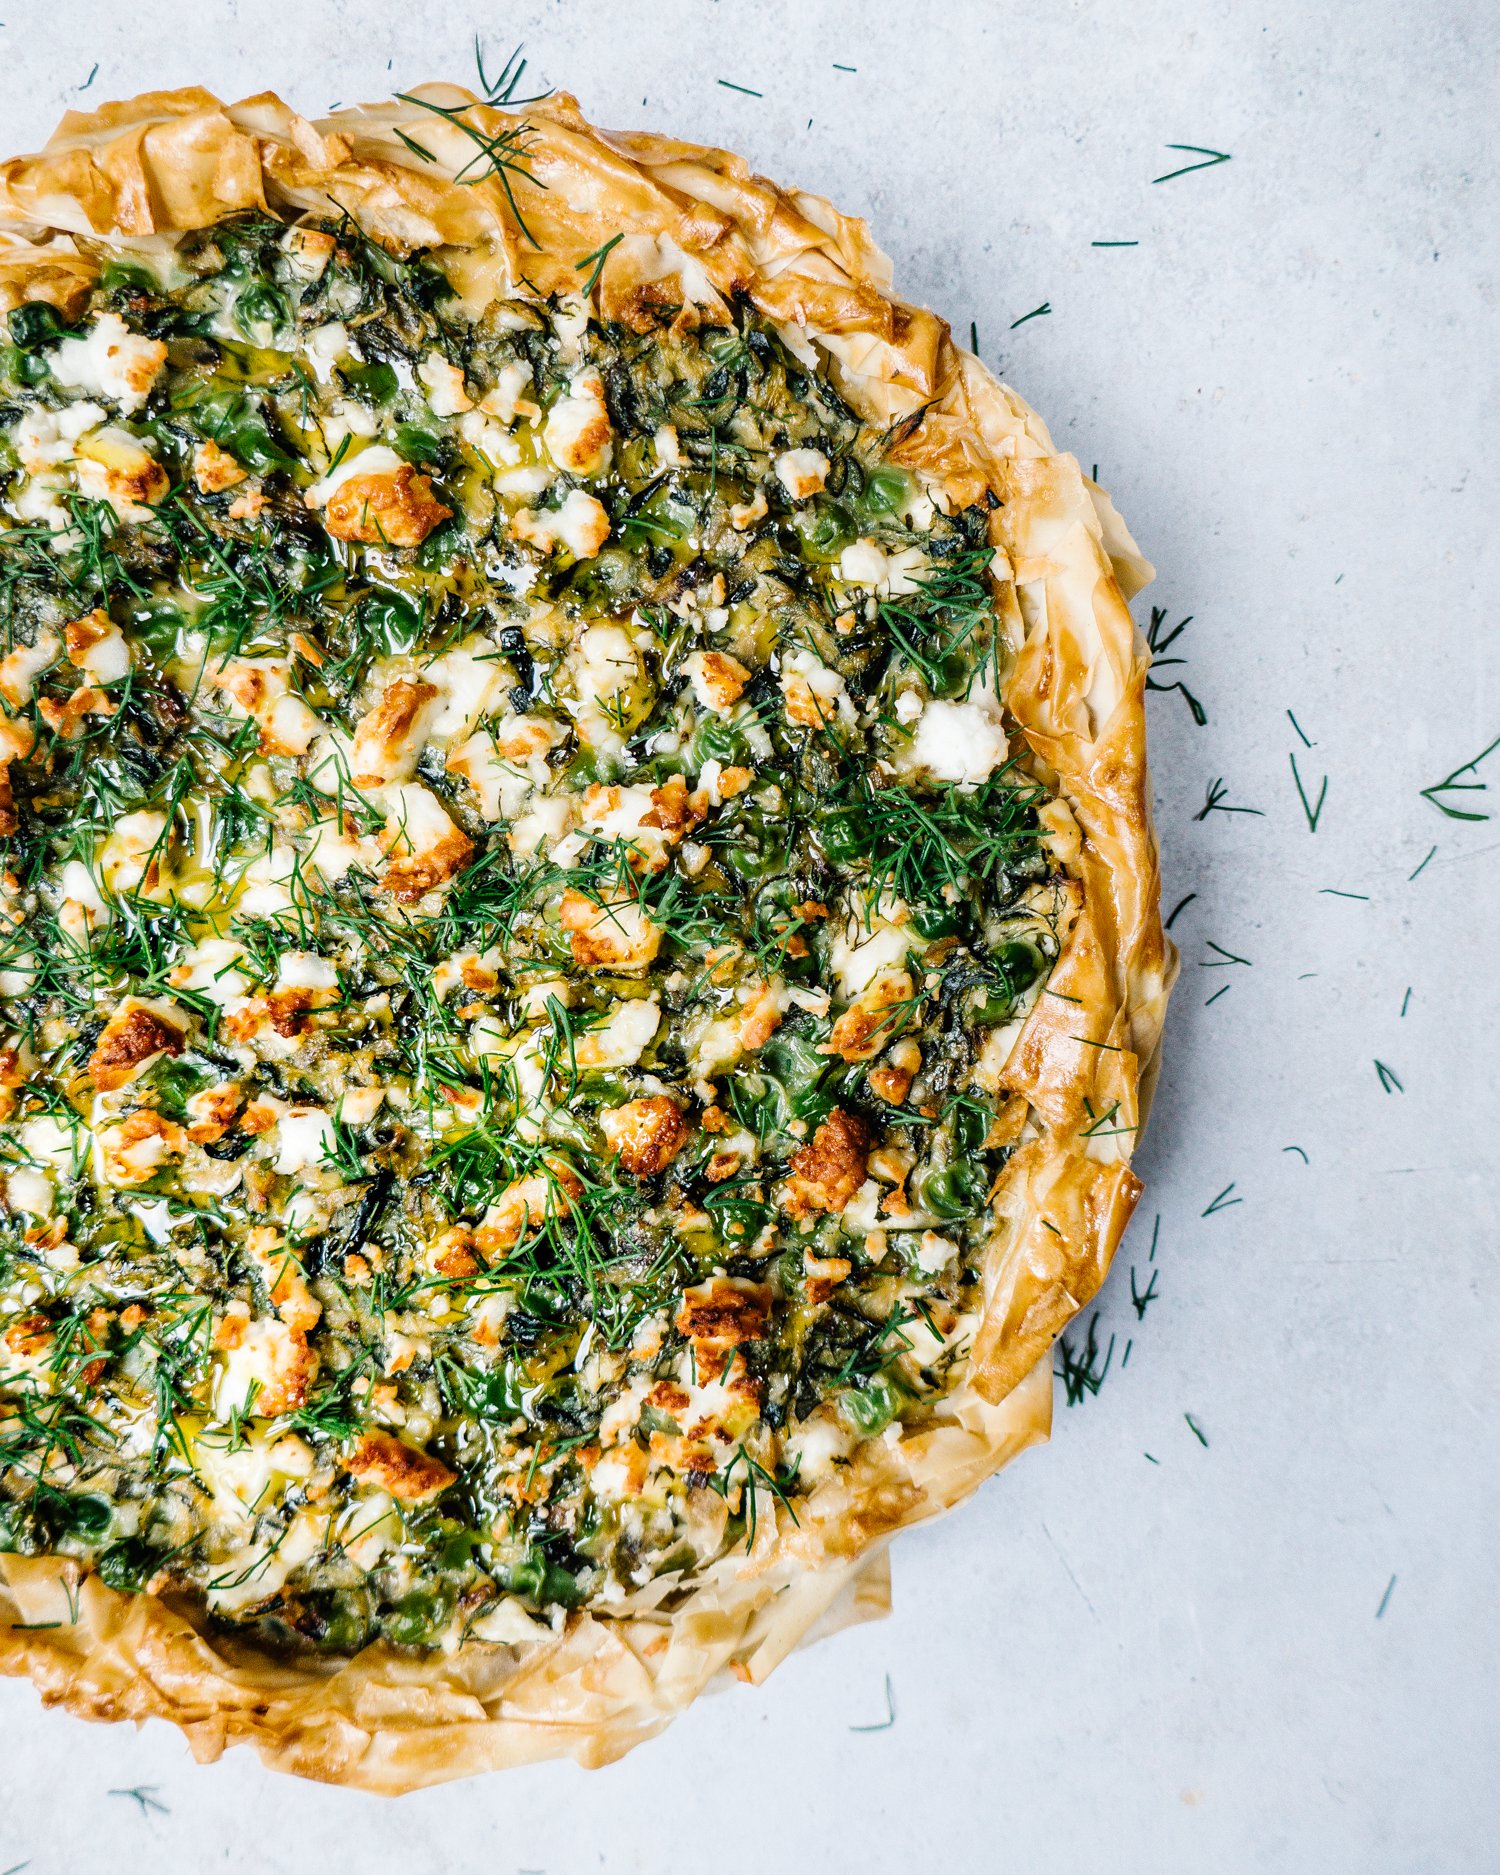 Courgette, Pea, Feta Filo Tart With Dill And Mint